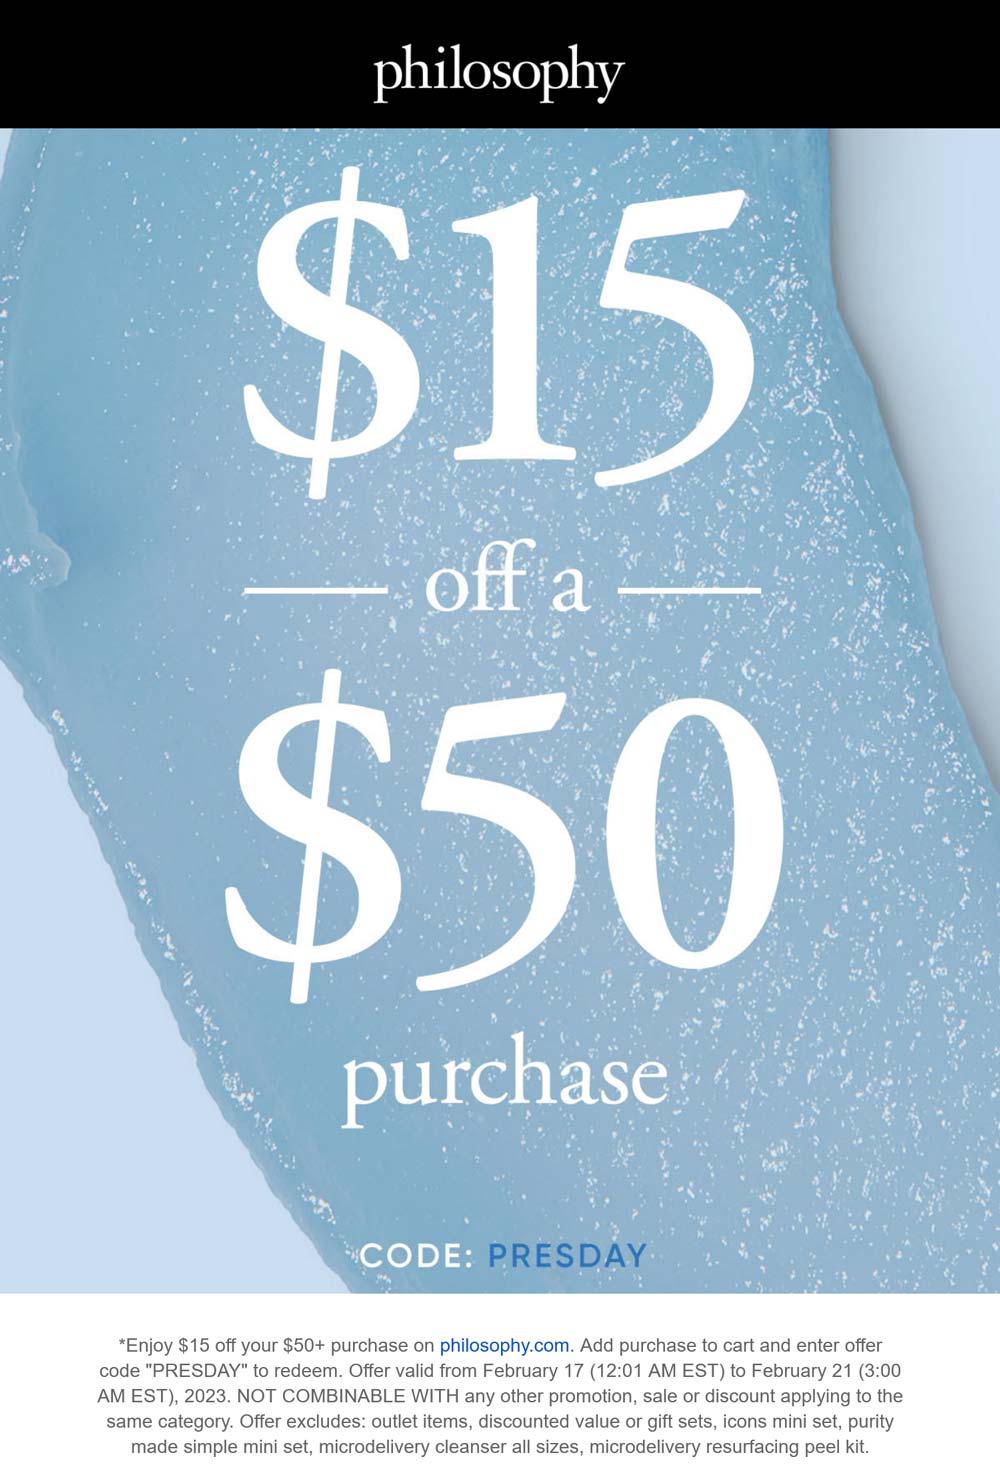 Philosophy stores Coupon  $15 off $50 at Philosophy via promo code PRESDAY #philosophy 